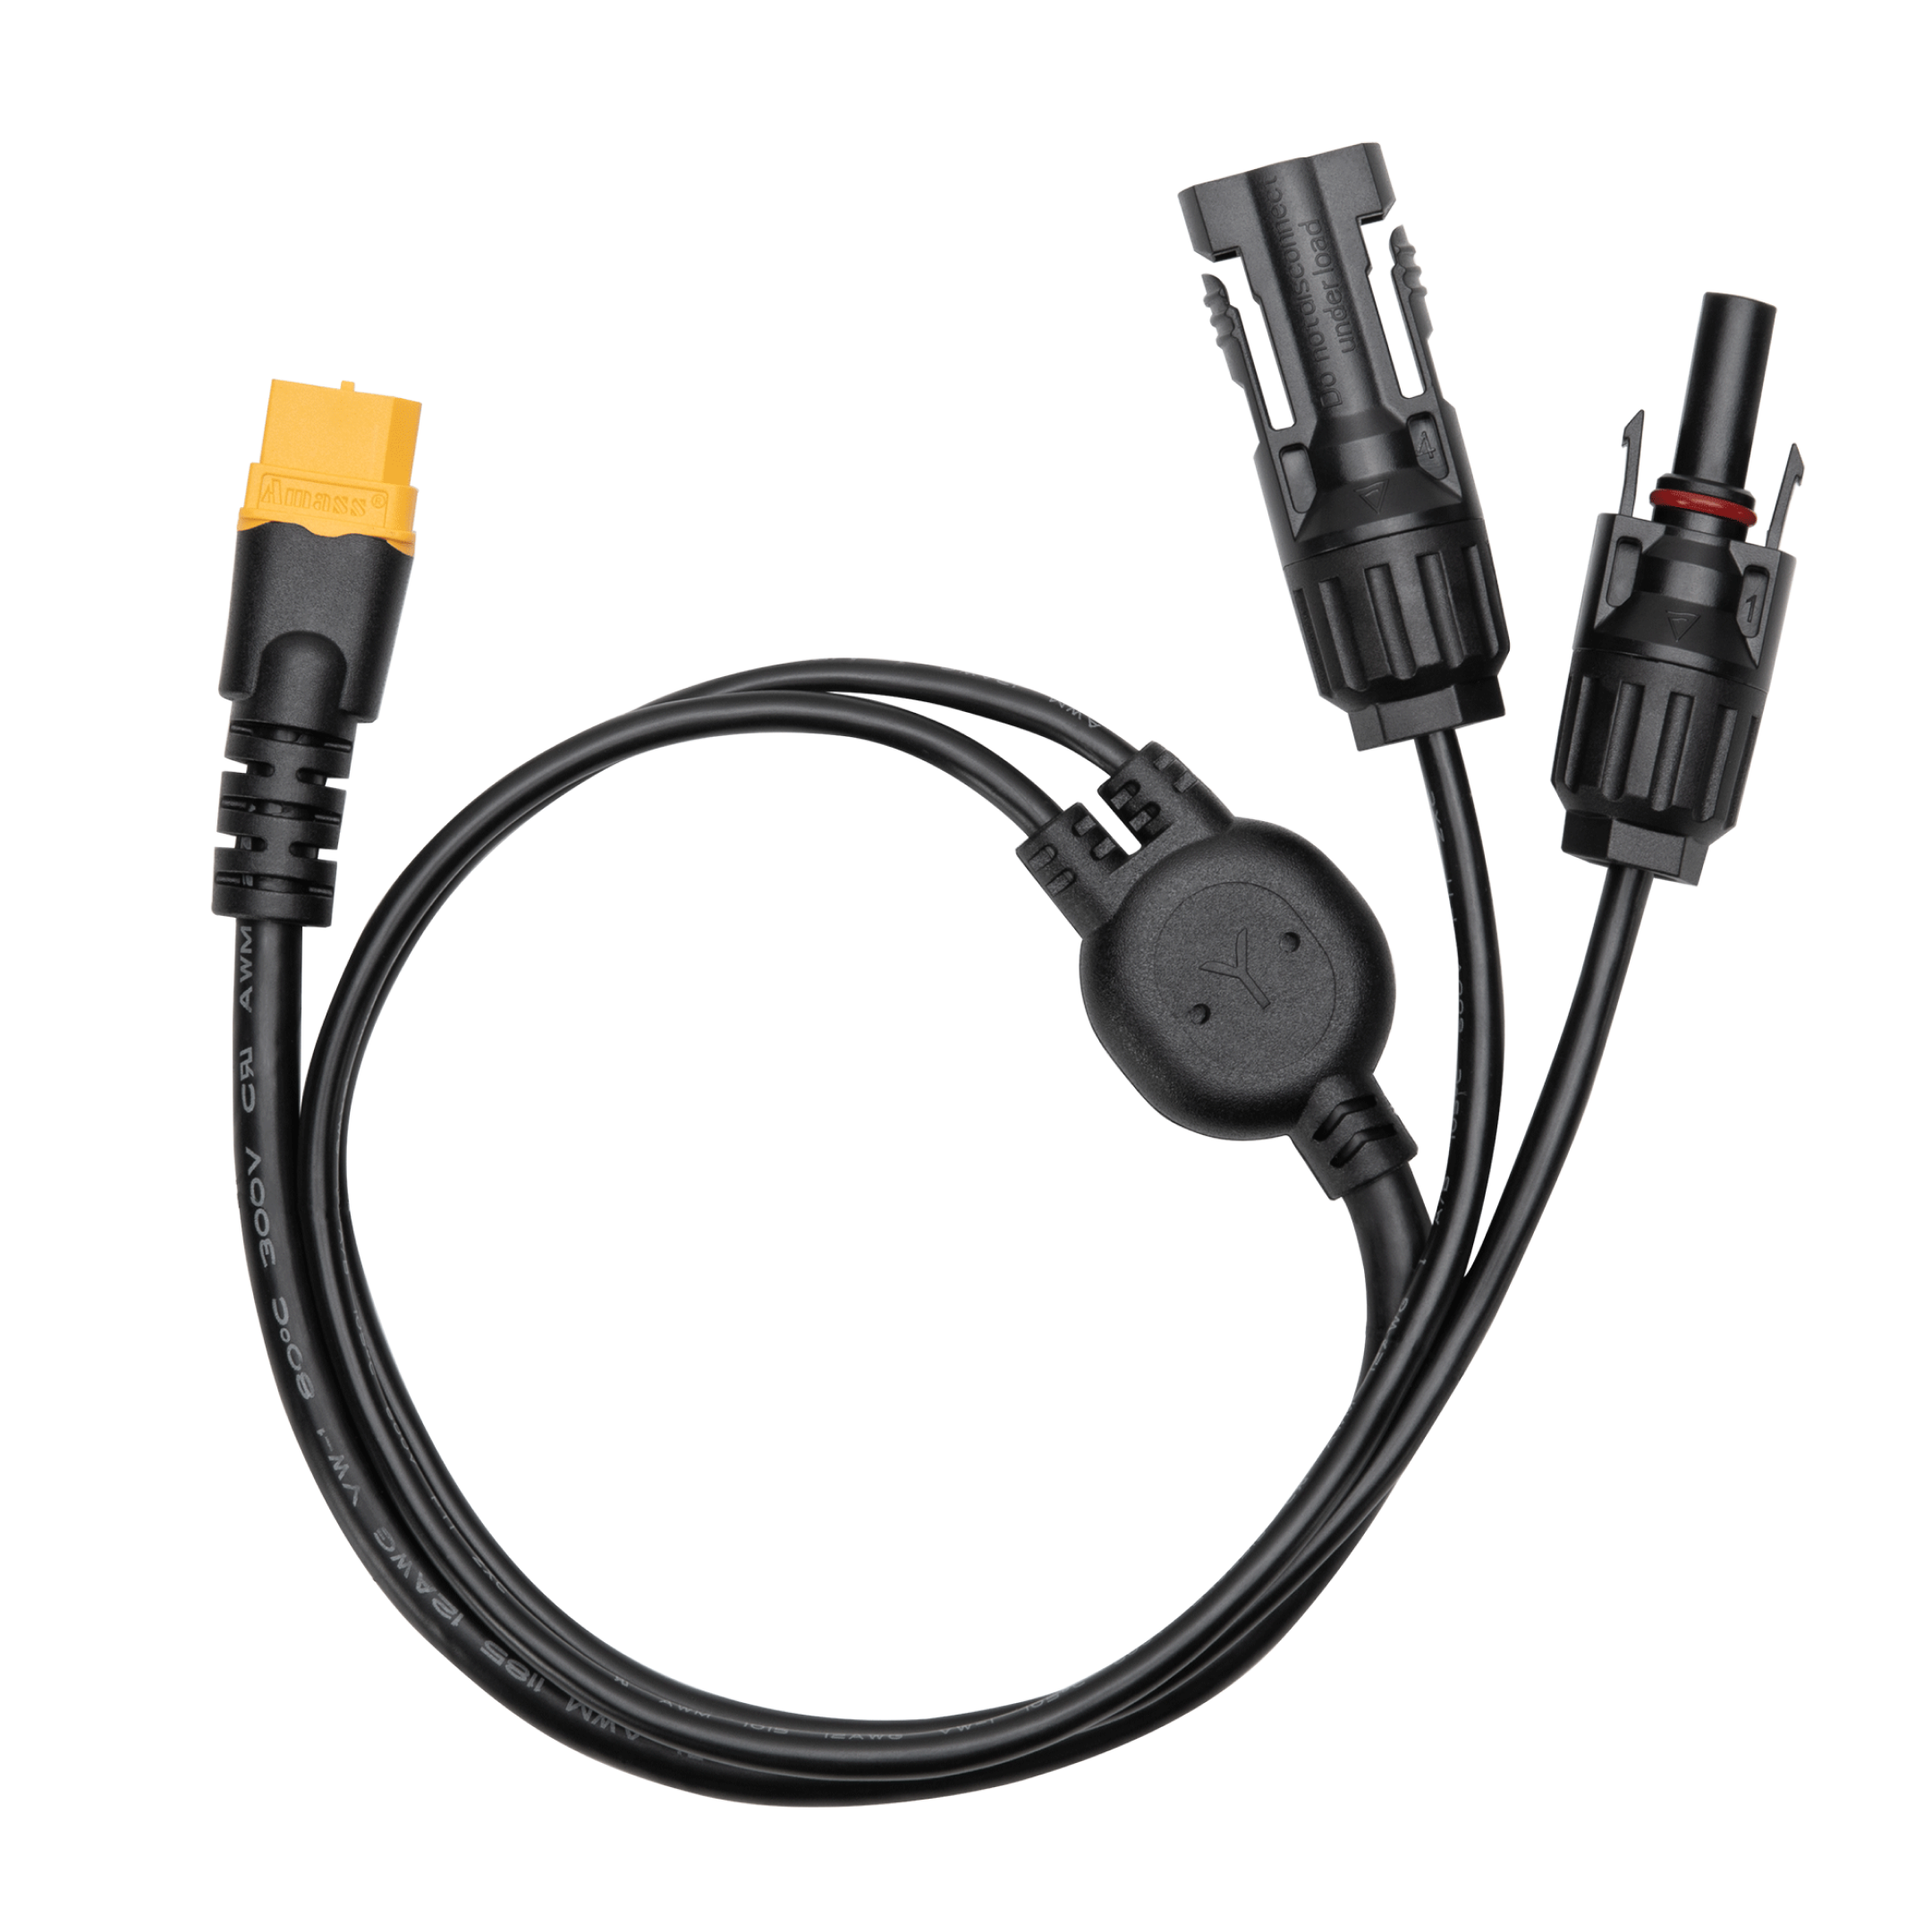 EcoFlow MC4 to XT60 Solar Charging Cable